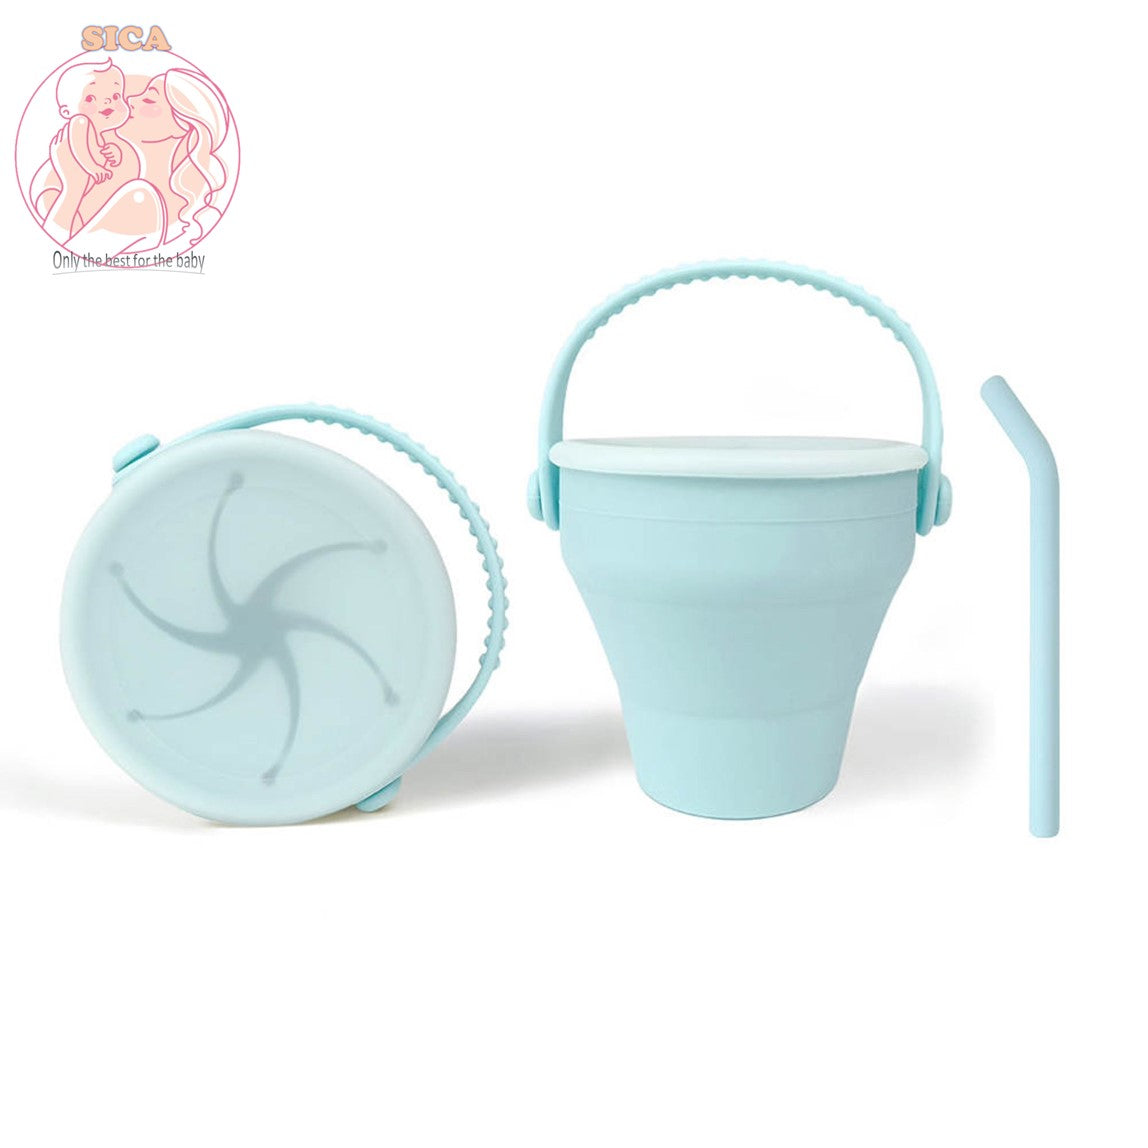 SICA 2-in-1 Foldable Snack Cup